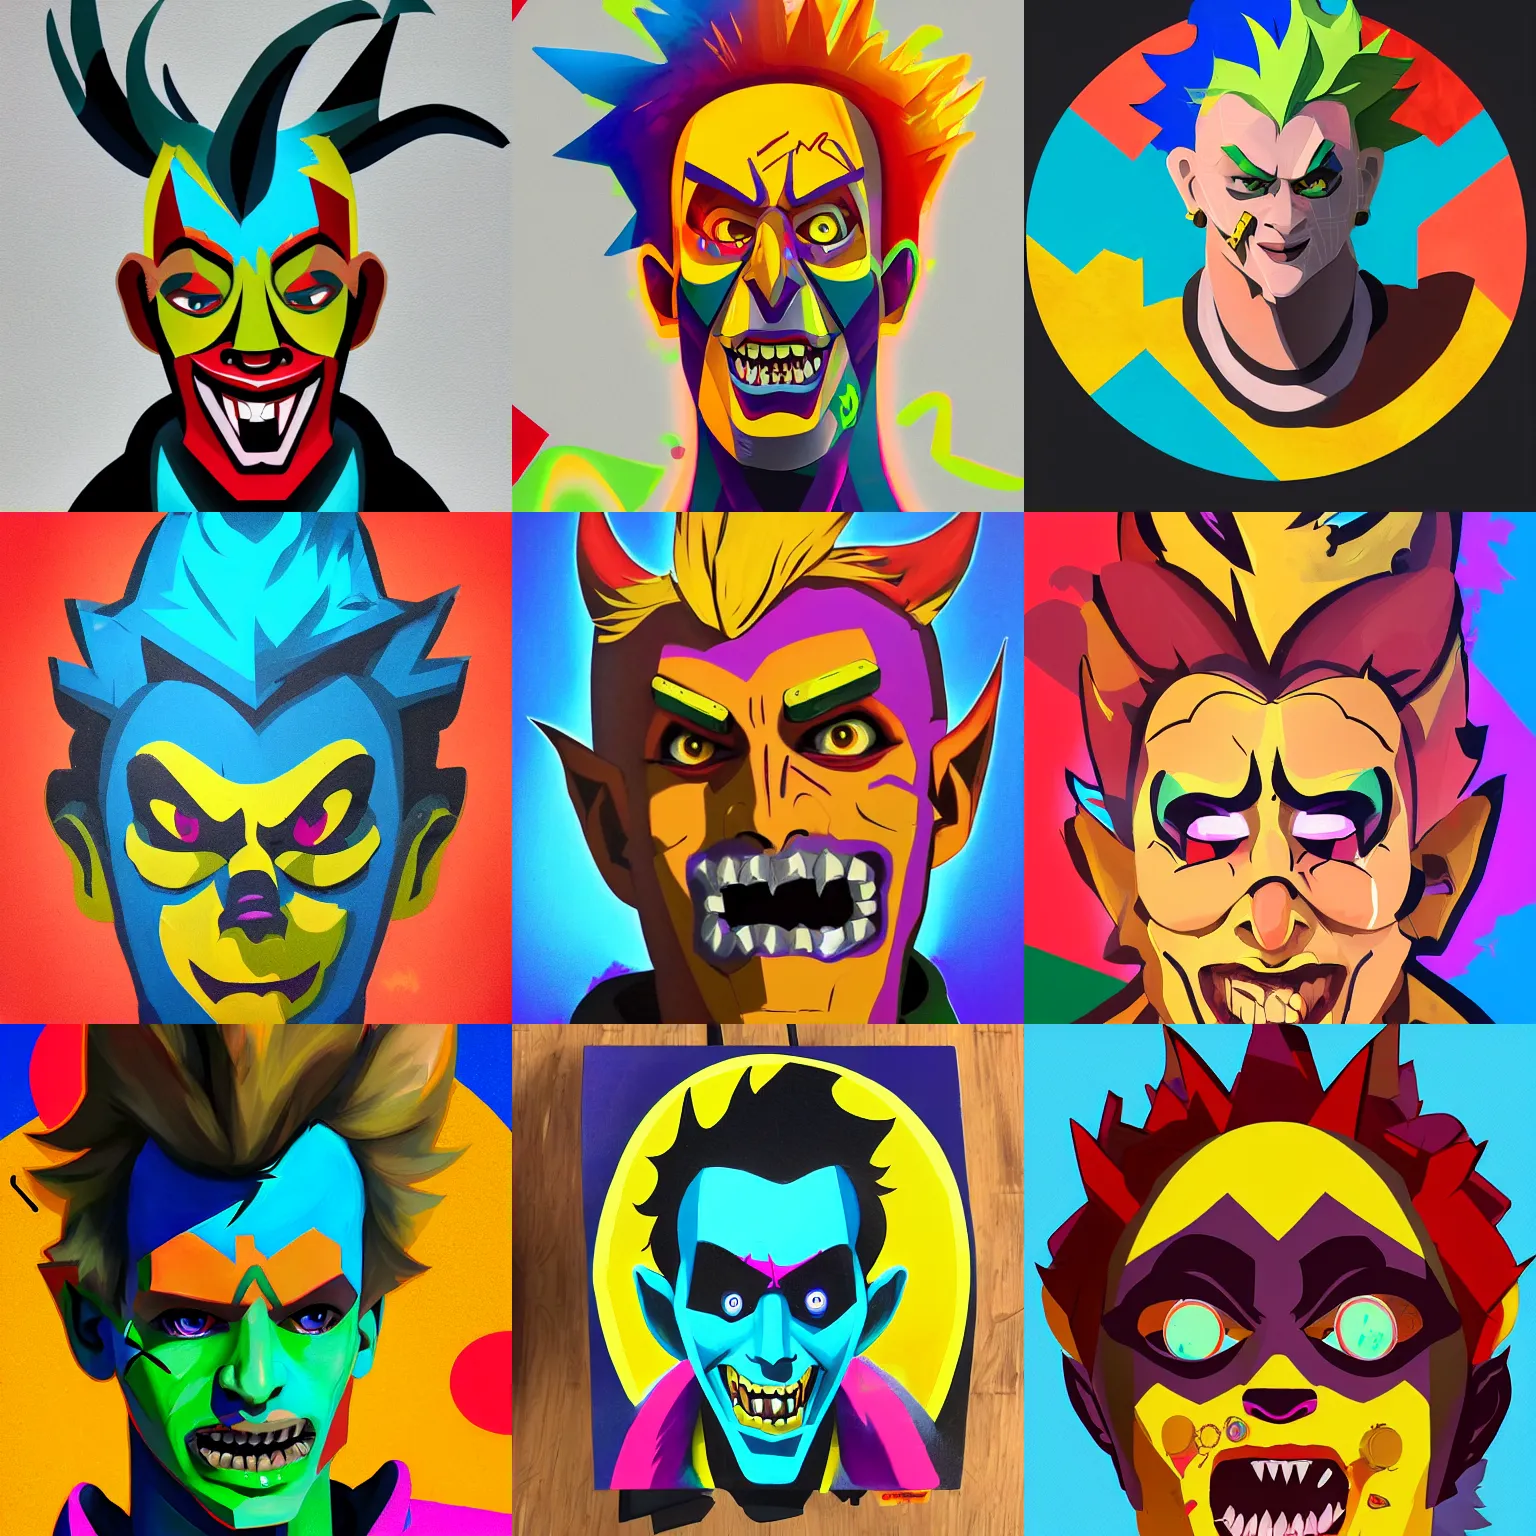 Prompt: A portrait of Junkrat from Overwatch, geometric shapes, rounded corners, vibrant colors, spray paint